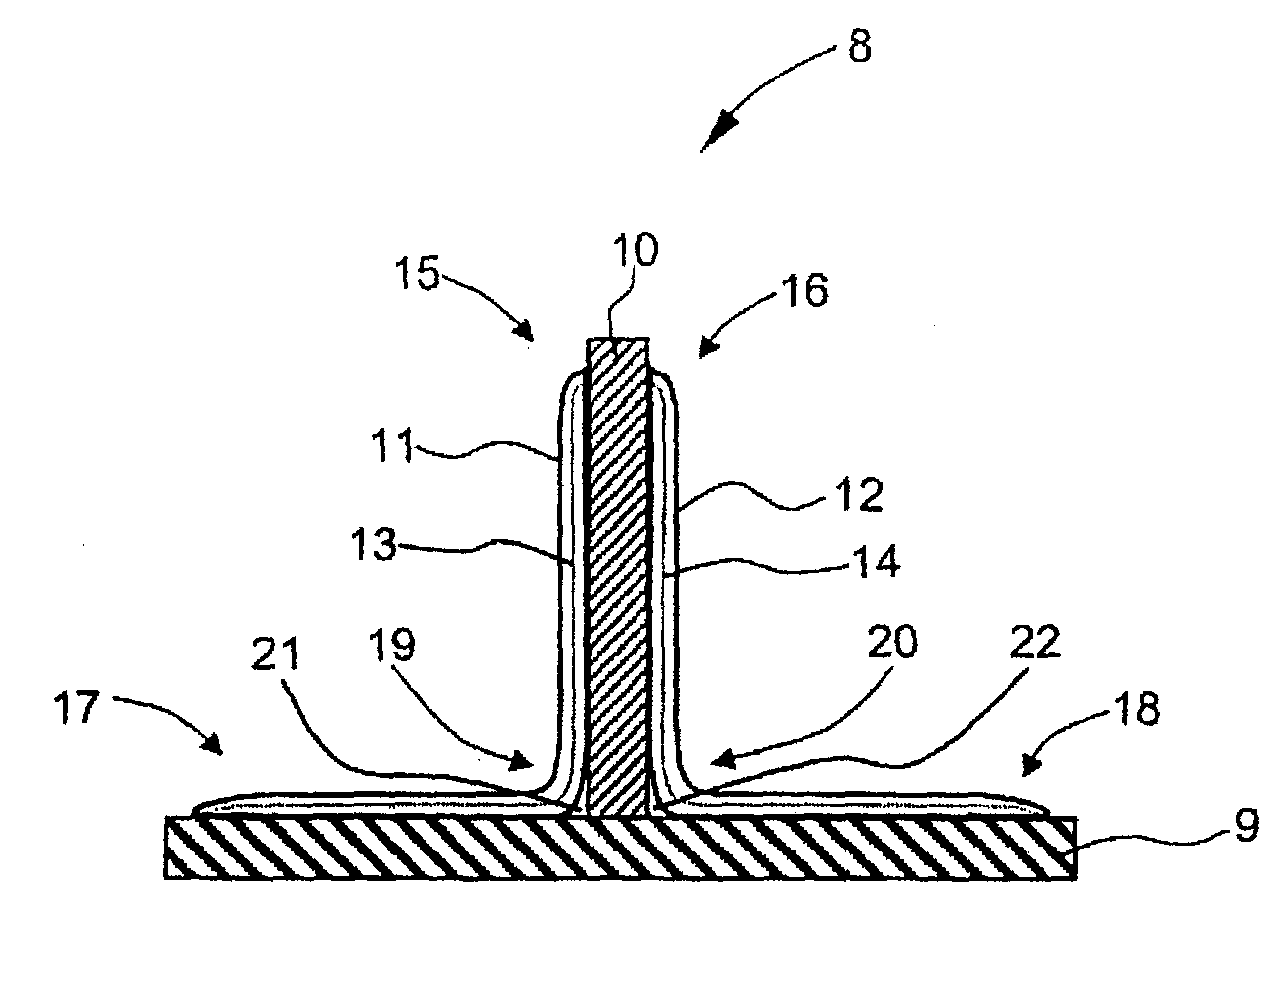 Method for manufacturing a reinforced shell for forming component parts for aircraft and shell for component parts for aircraft